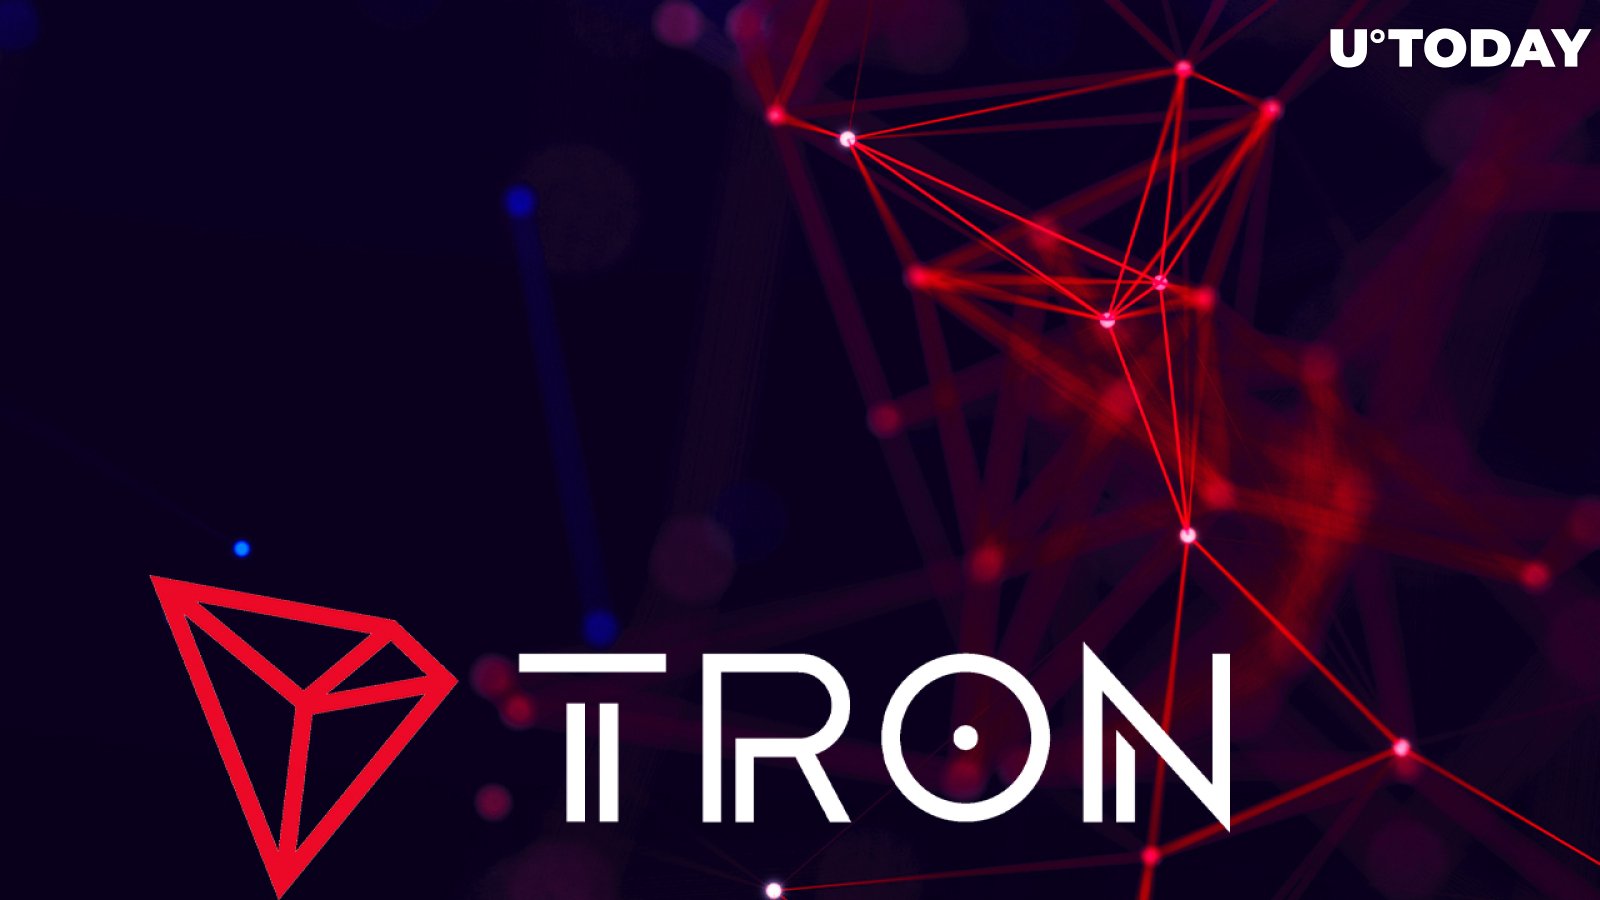 Tron (TRX) Rallies by 10% After Network Celebrates 90 Million Opened Accounts